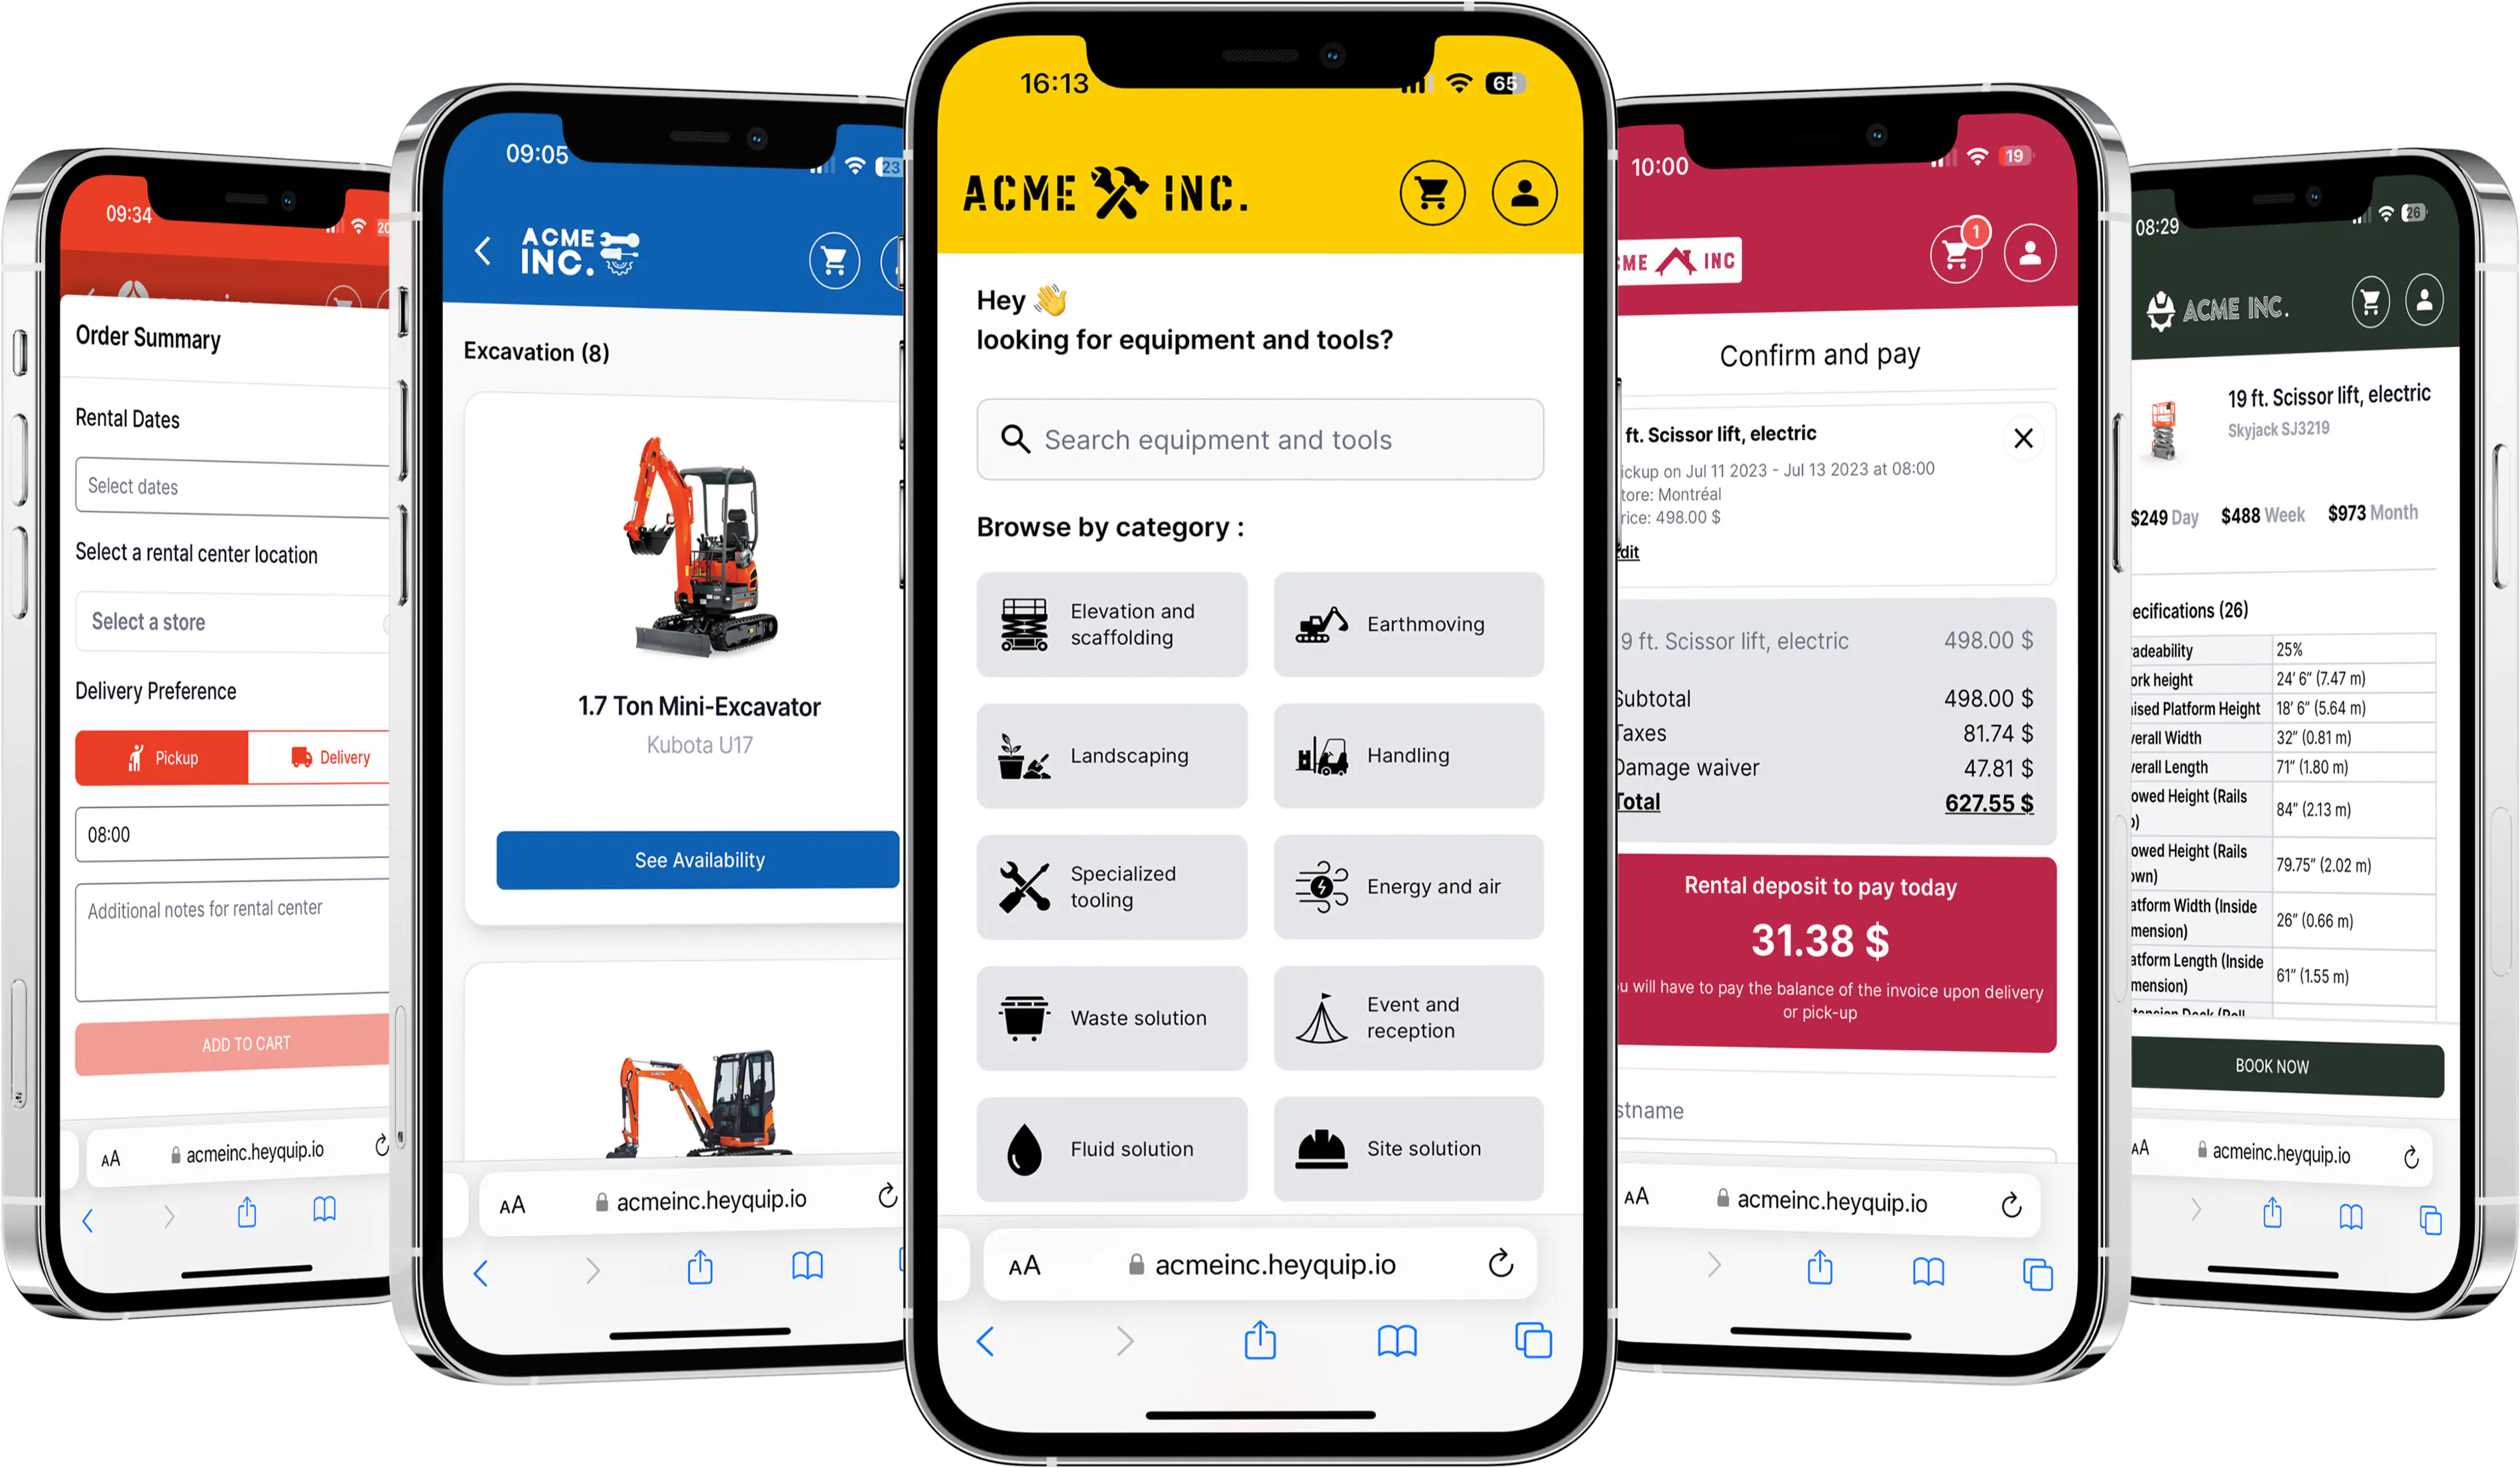 Screenshots of Heyquip booking platform for equipment and tool rental centers on multiple phones />
</div>

<div class=